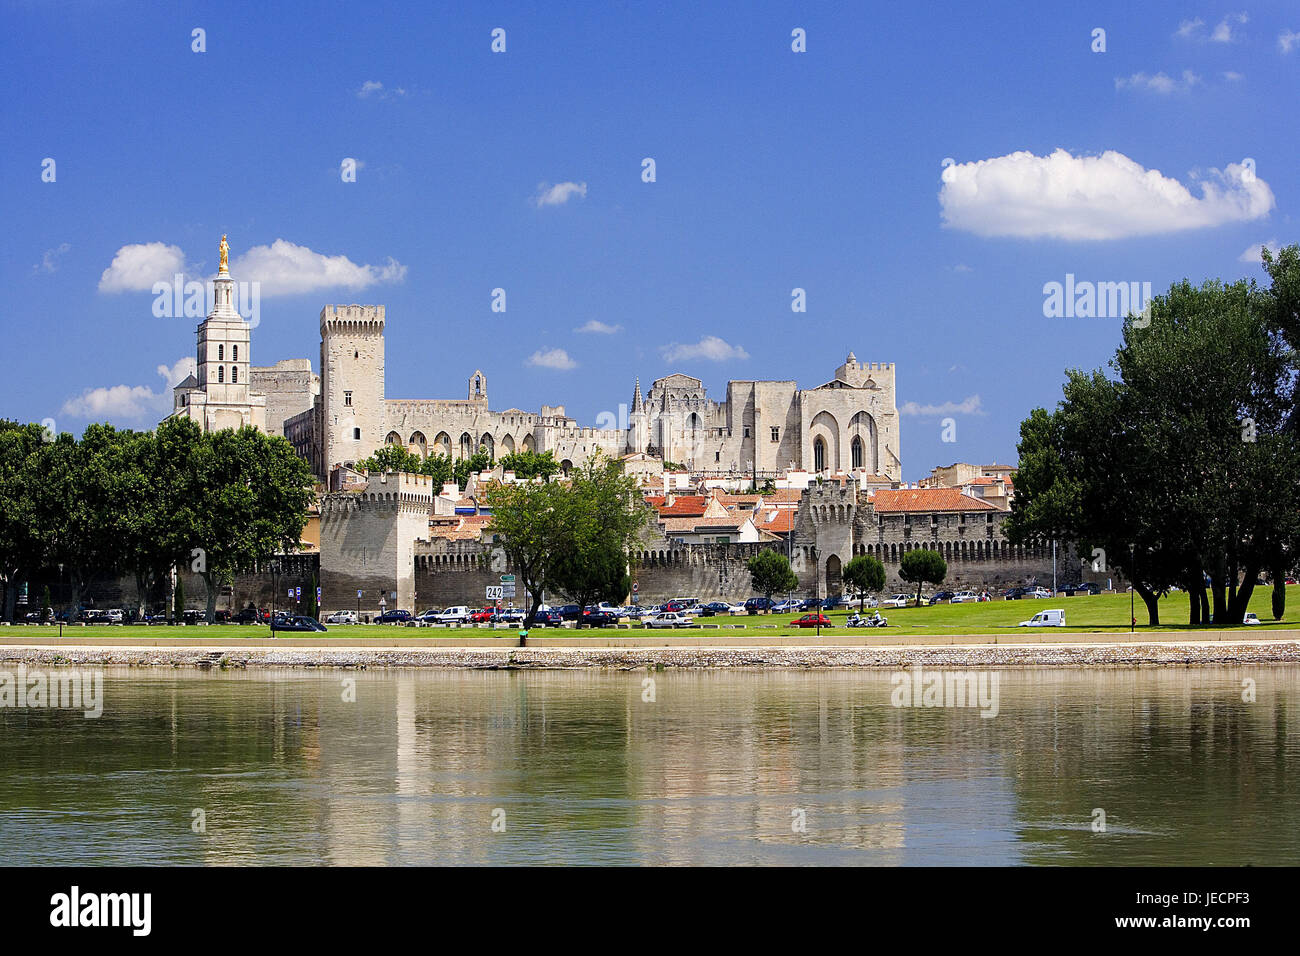 France, Provence, Avignon, town view, pope's palace, river, town, Rohne, riverside, palace, doubles palace, structure, architecture, culture, place of interest, destination, tourism, UNESCO-world cultural heritage, Stock Photo